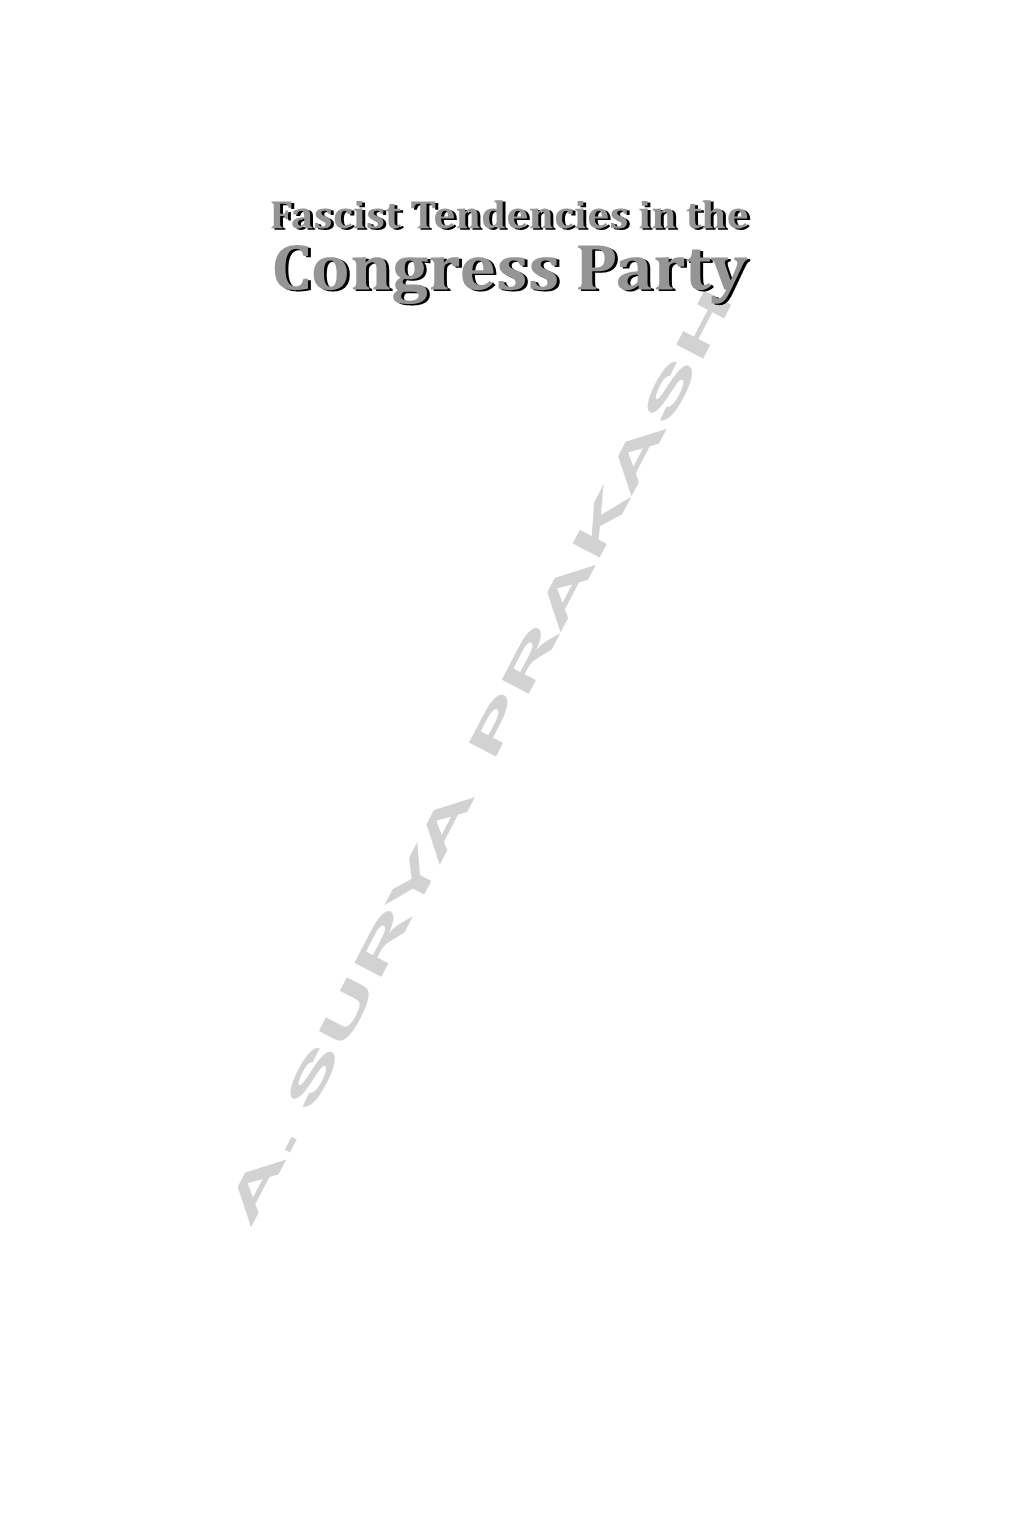 FASCIST TENDENCIES in the CONGRESS PARTY by A